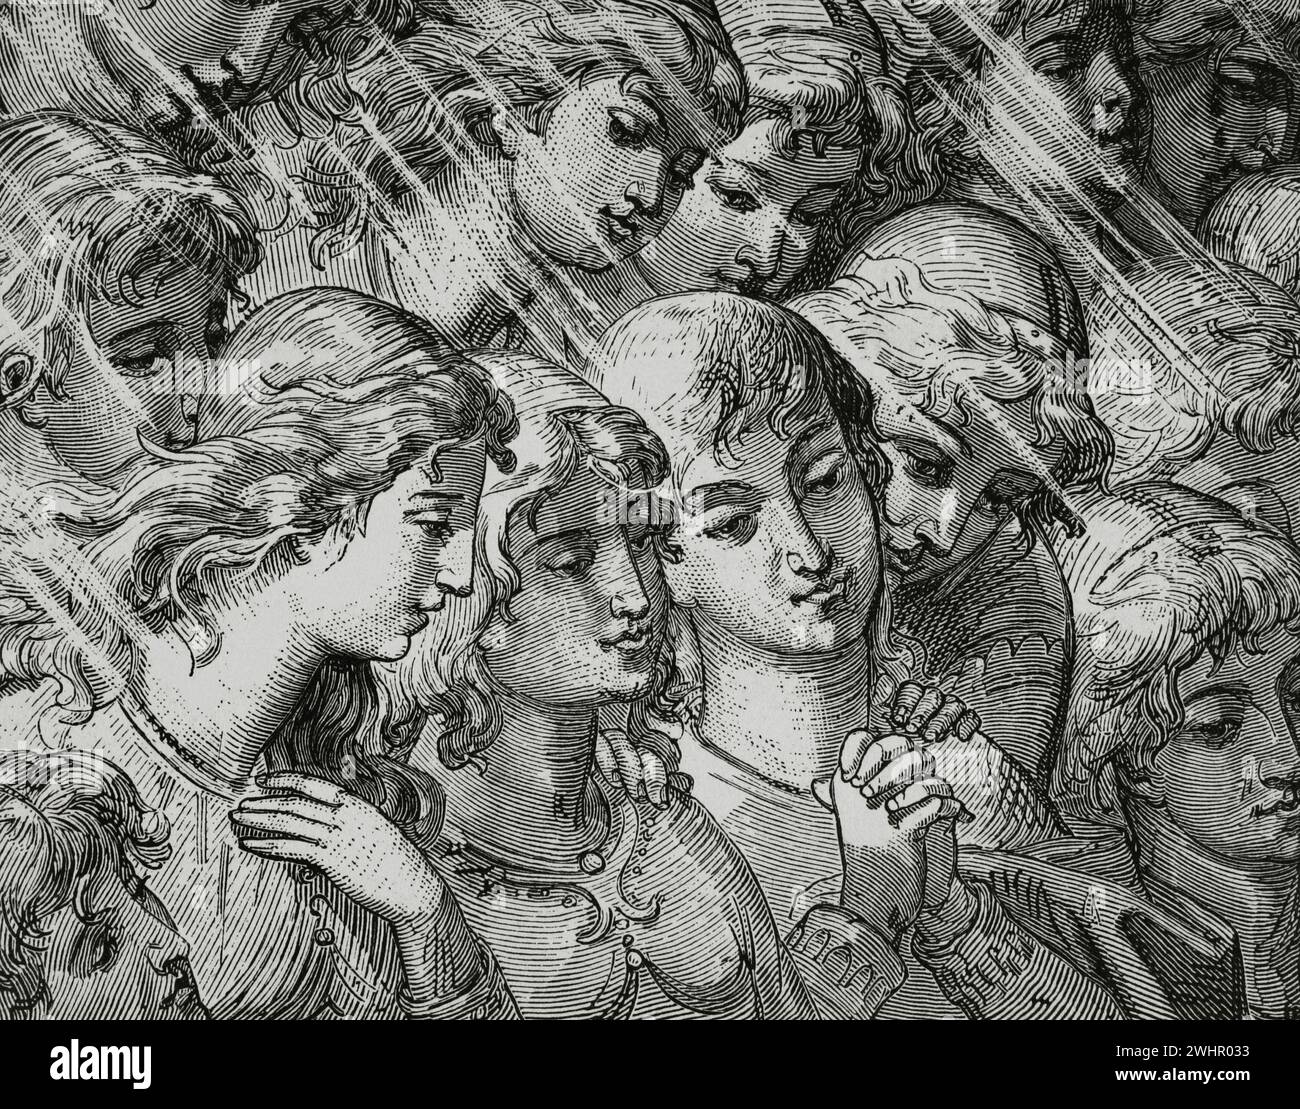 The Divine Comedy (1307-1321). Italian narrative poem by the Italian poet Dante Alighieri (1265-1321). The Paradise. 'In your marvellous aspects there shines I know not what divine...' Illustration by Yann Dargent (1824-1899). Engraving. Published in Paris, 1888. Stock Photo